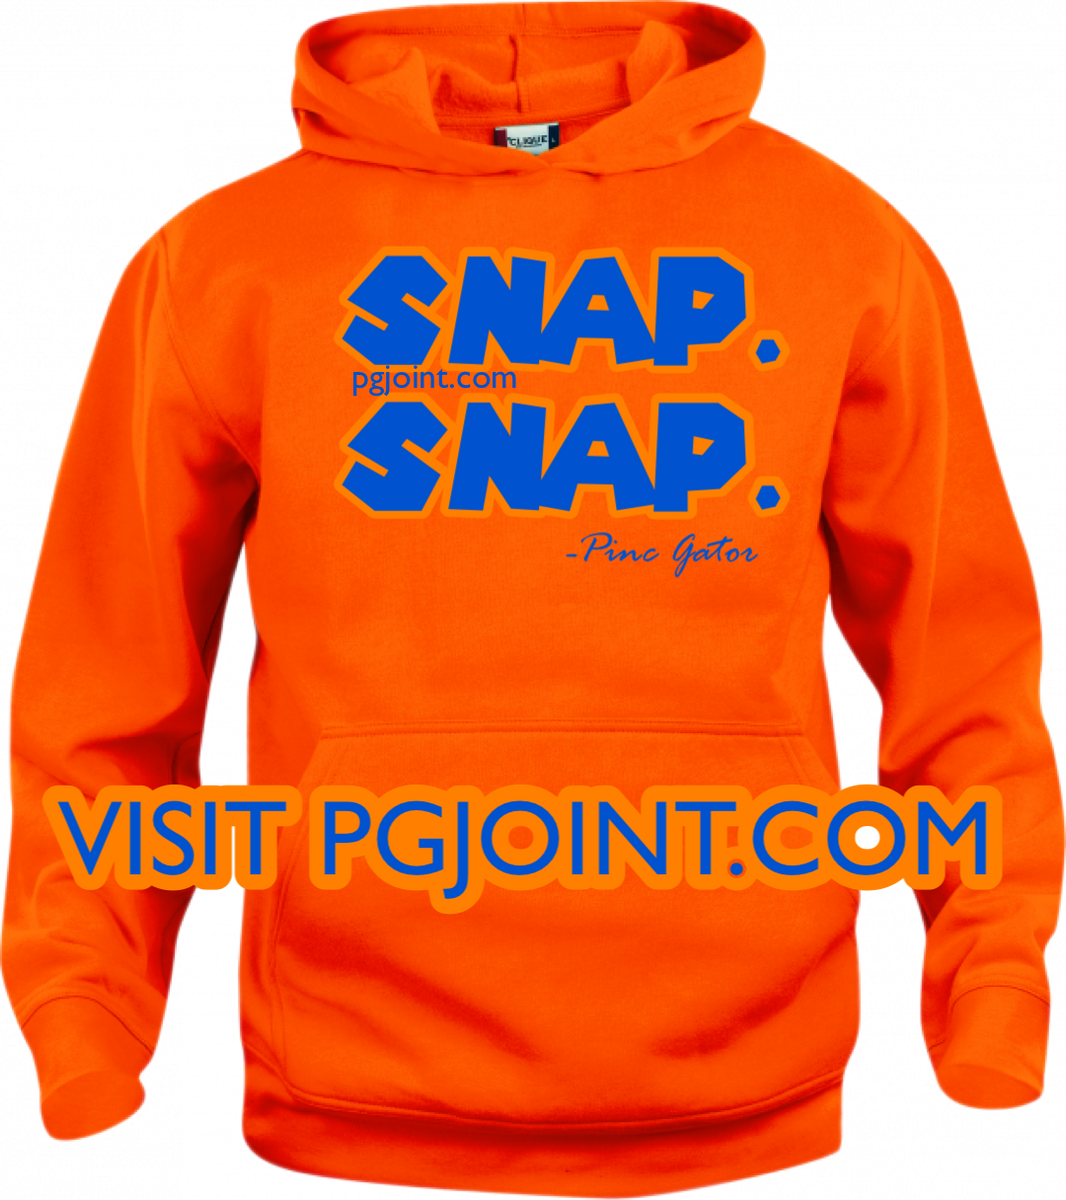 SNAP SNAP embroidered hoodie